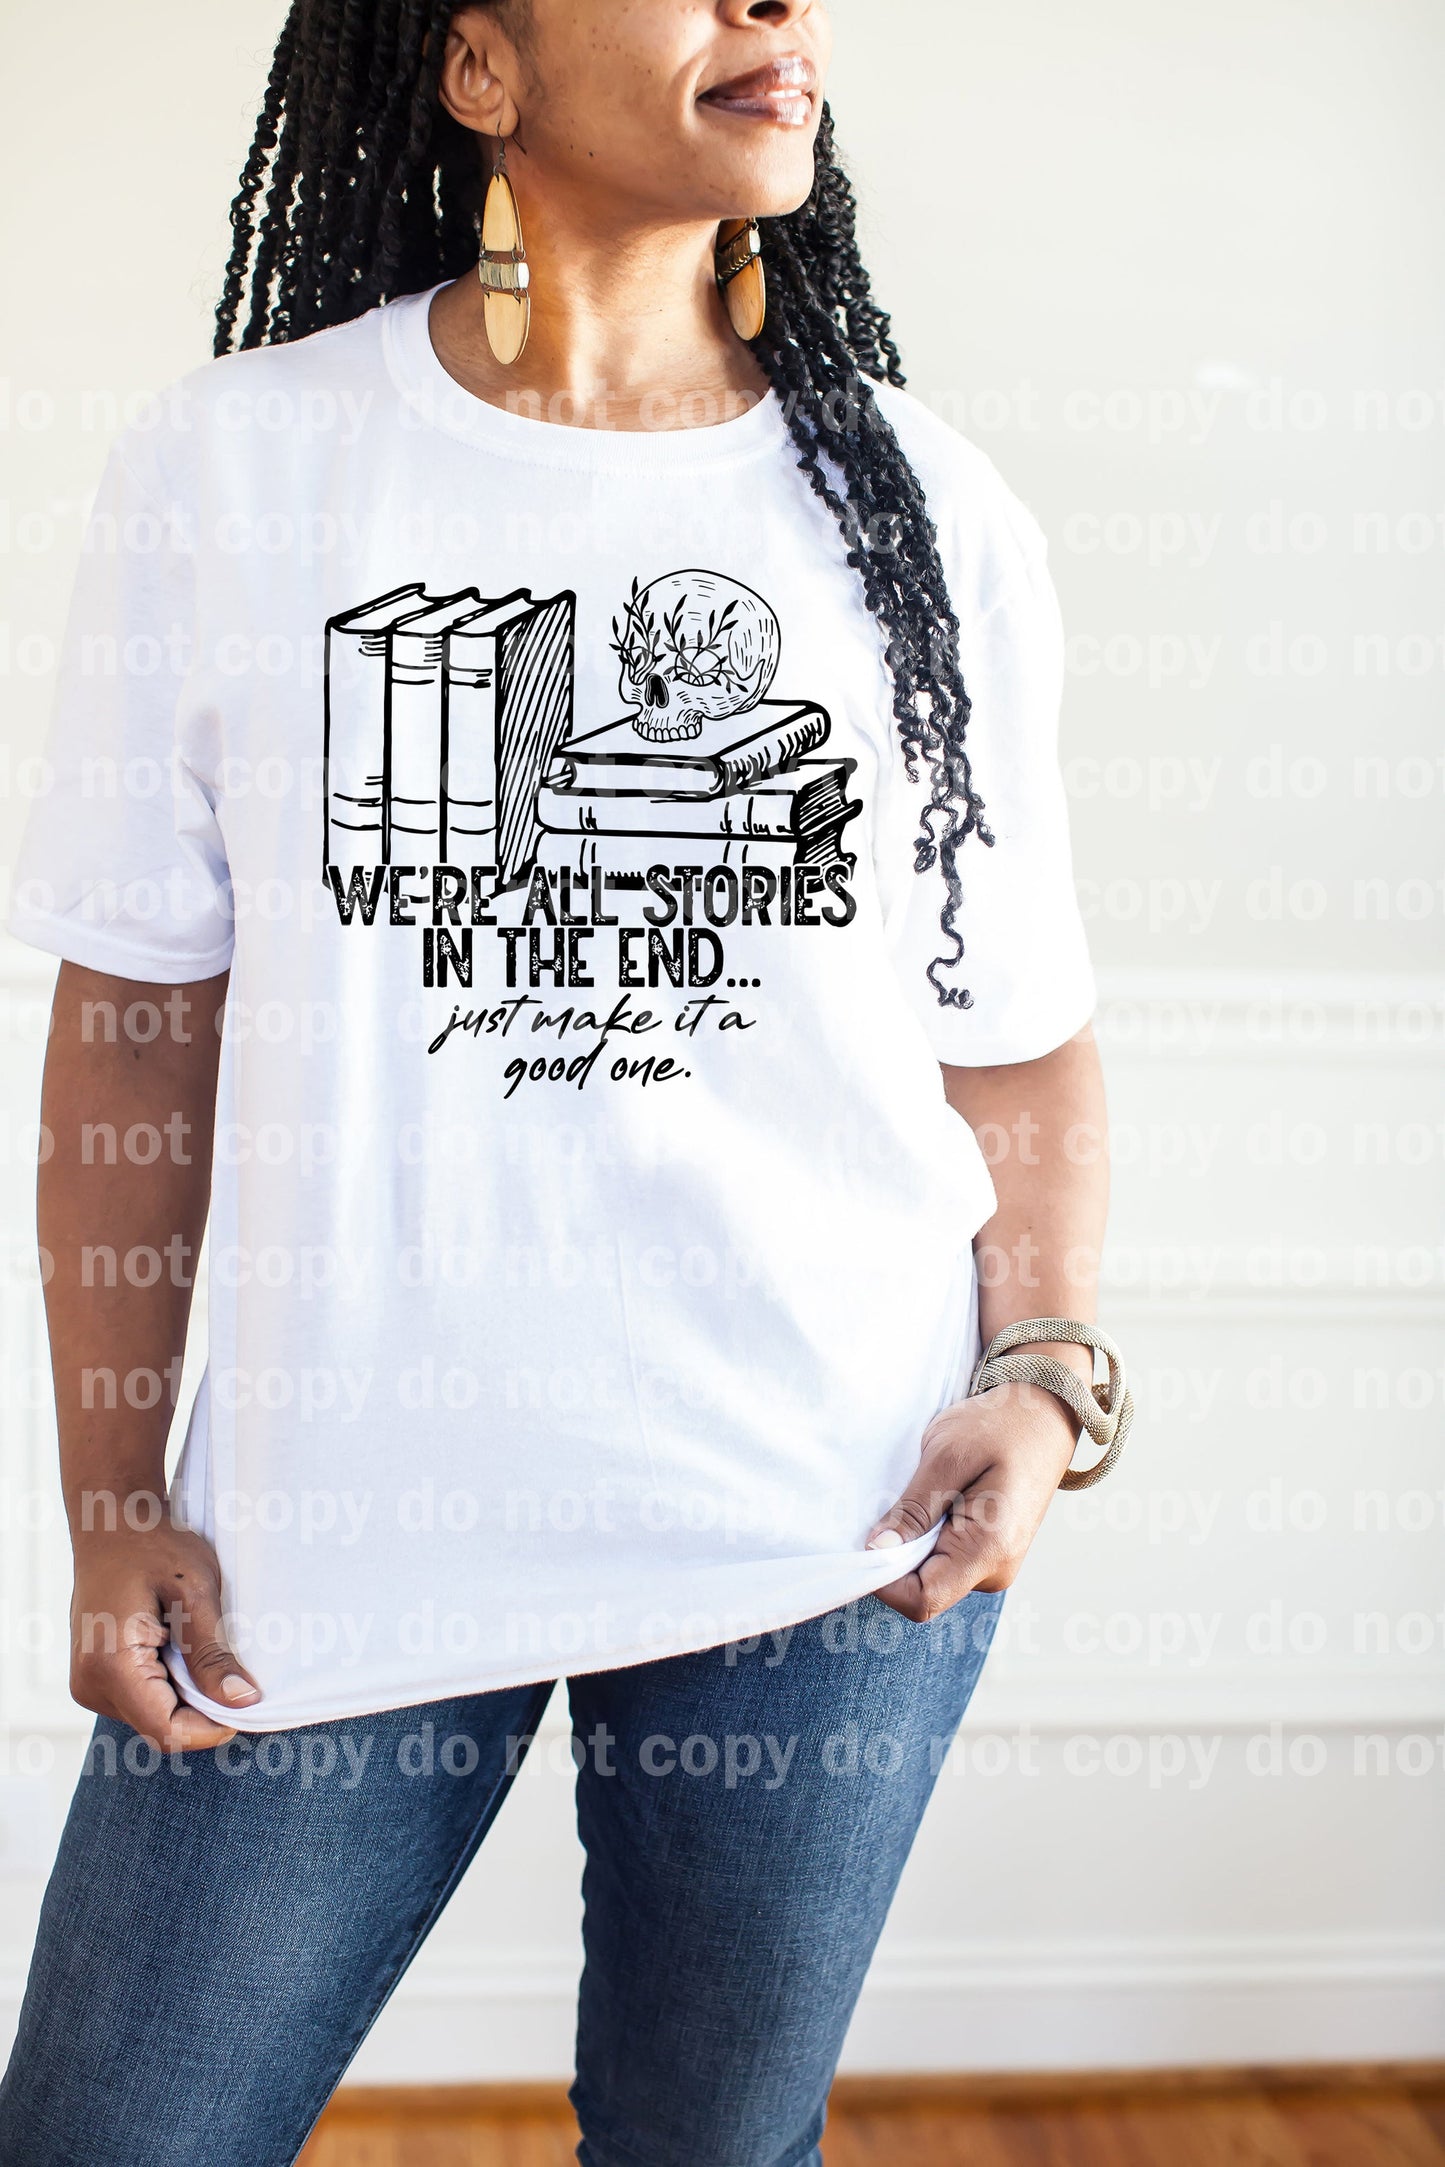 We're All Stories In The End Just Make It A Good One Full Color/One Color Dream Print or Sublimation Print